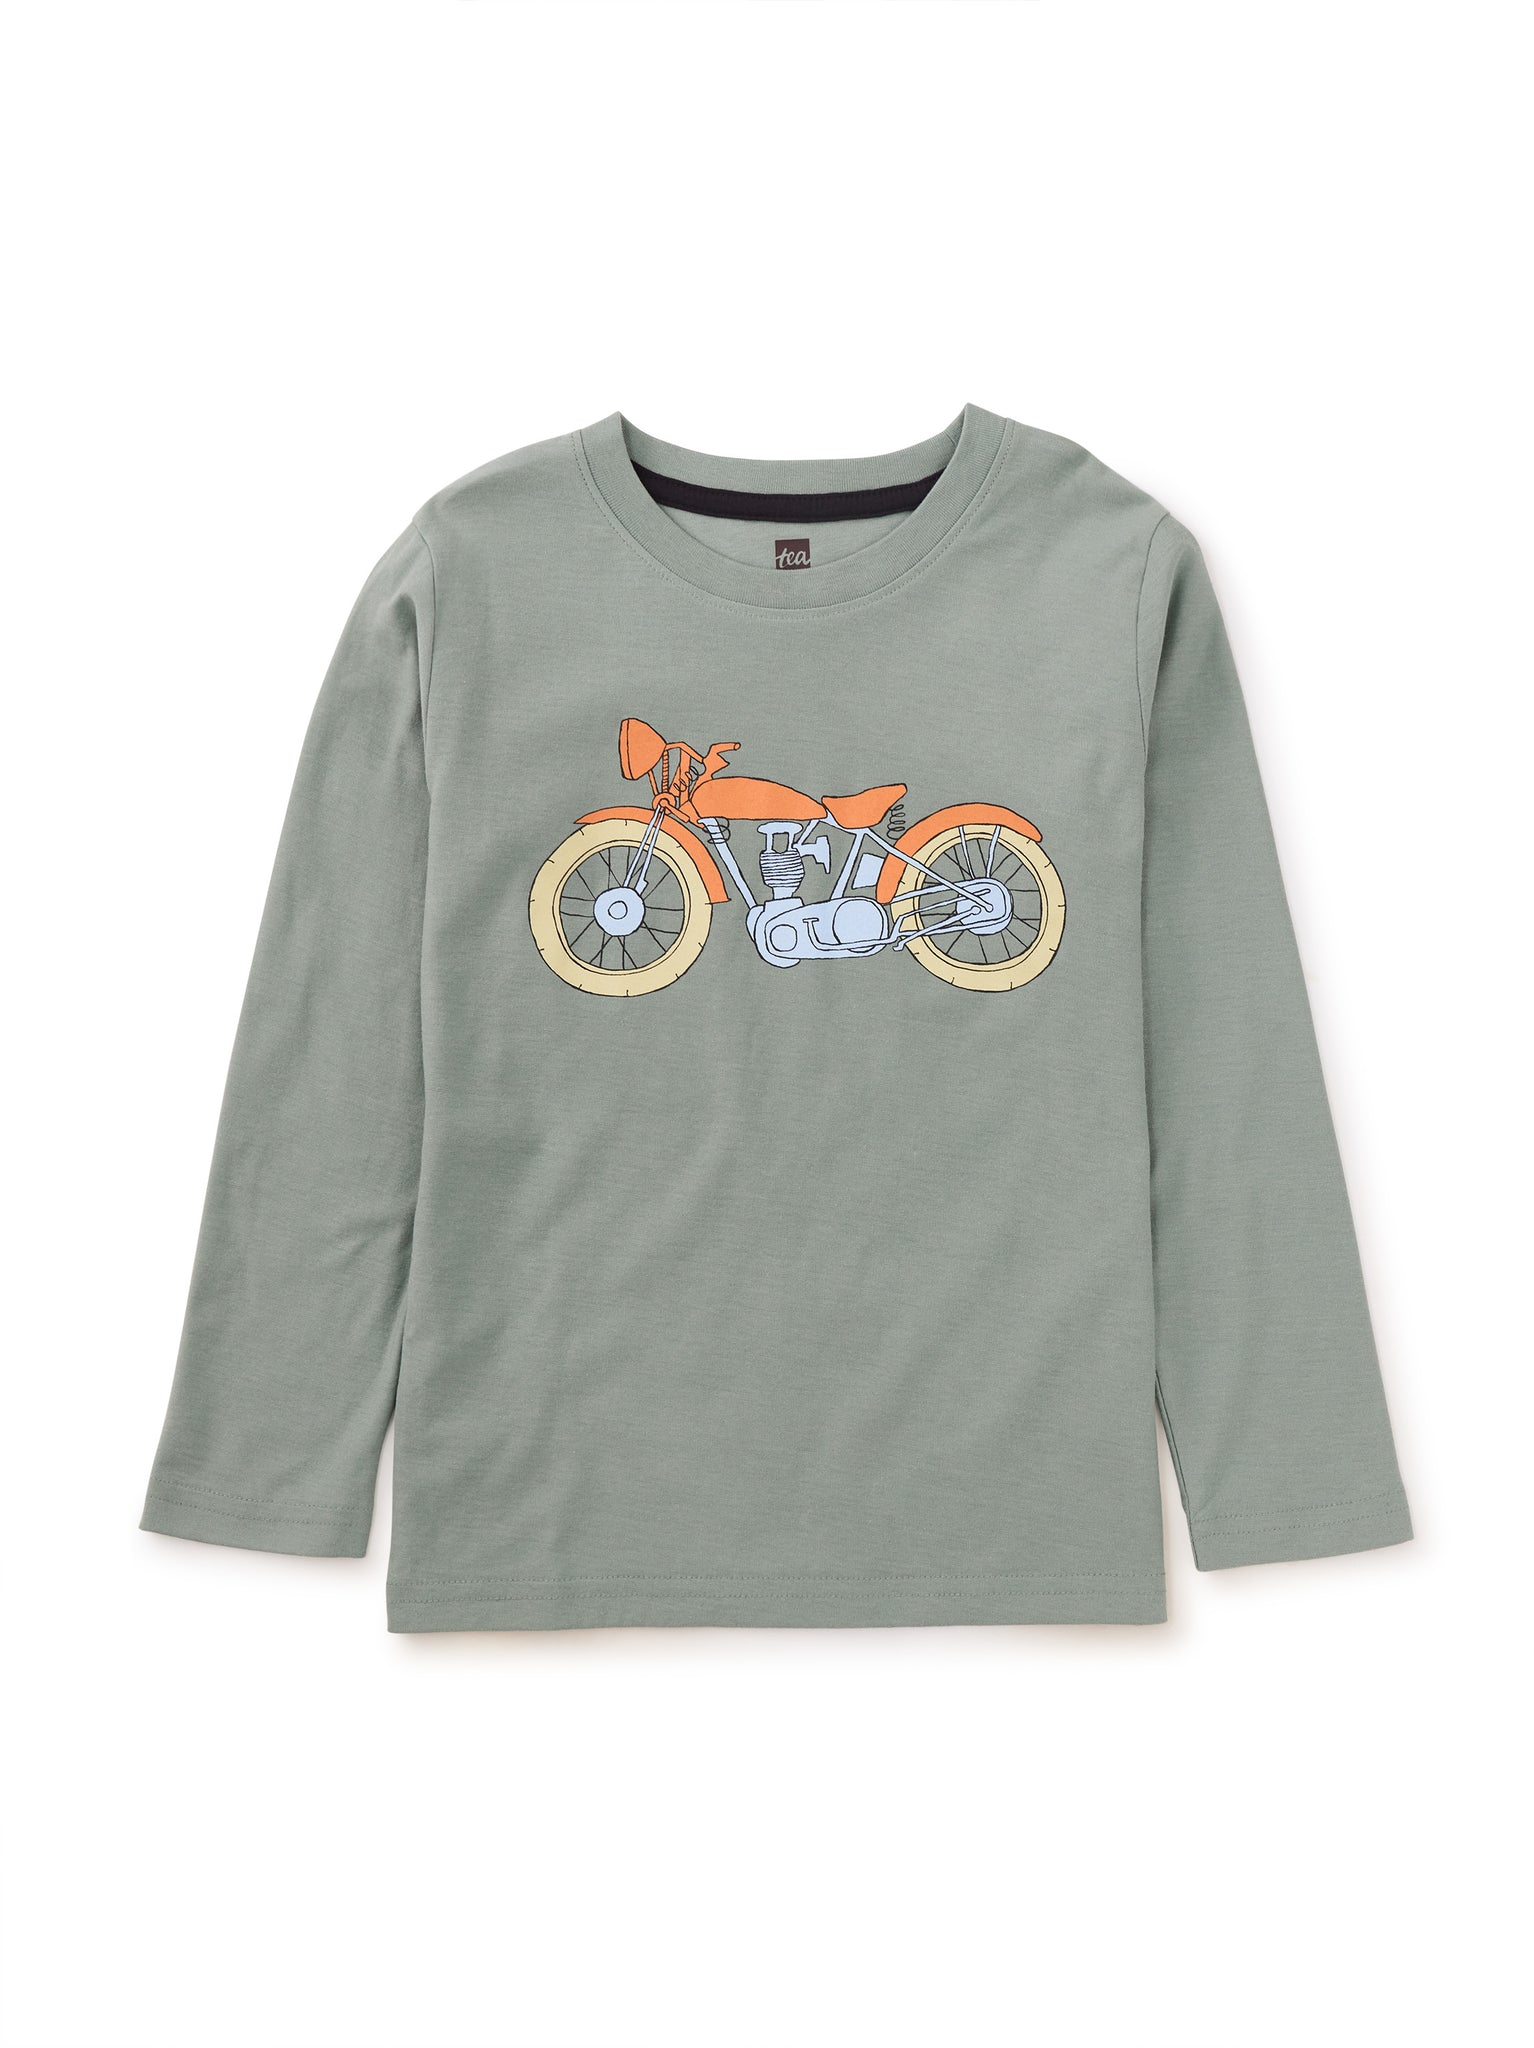 Motorcycle Dairies Graphic Tee